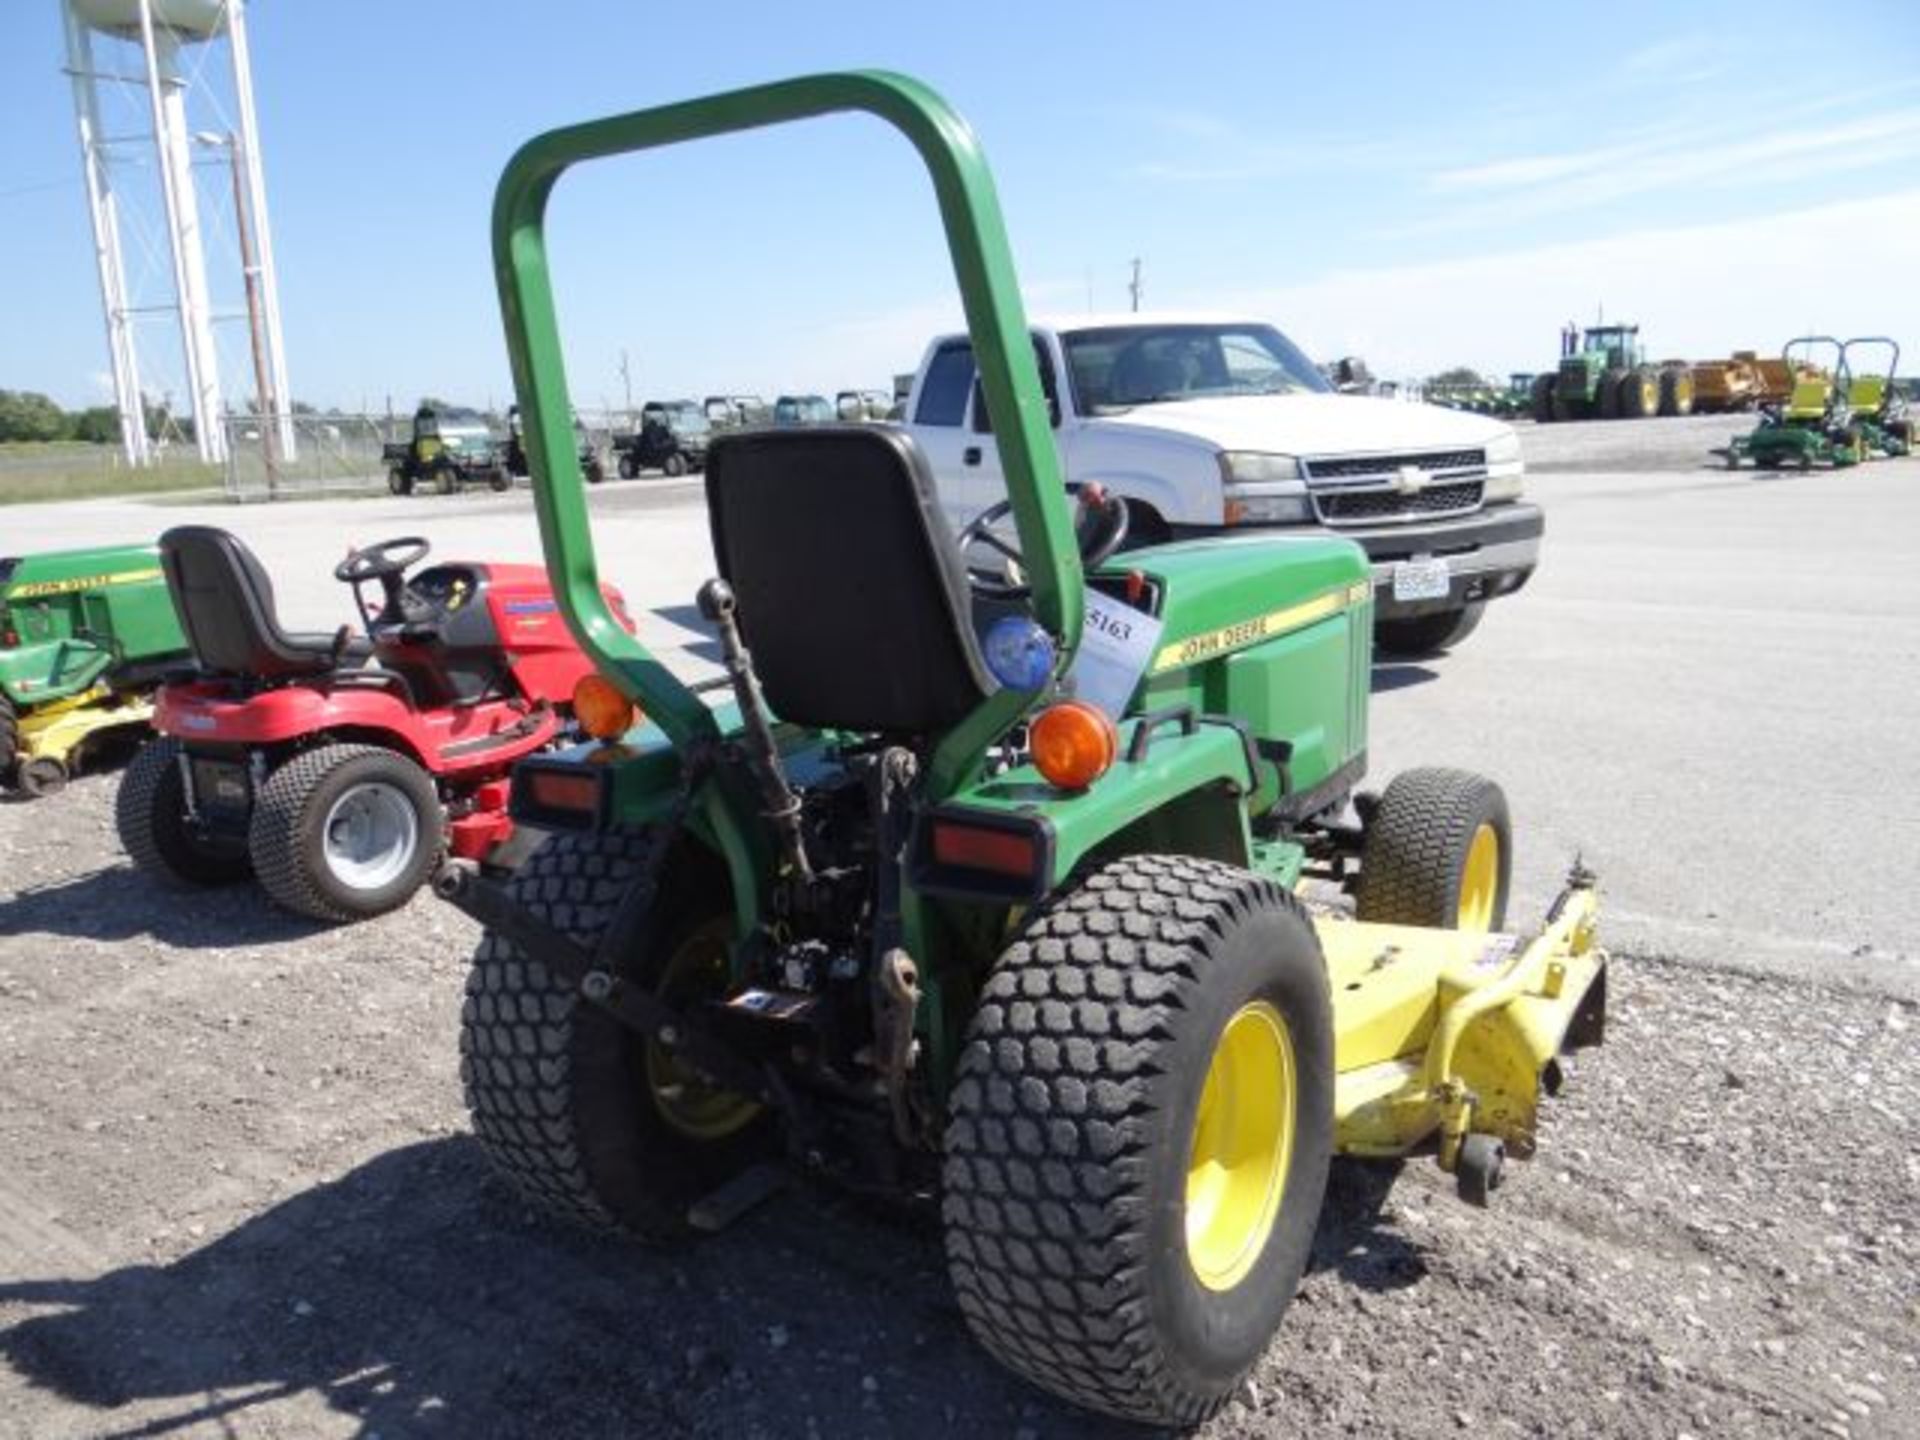 Lot 65163 - 1994 JD 855 Compact Tractor 1012 hrs, 24hp, Diesel, 2wd, 2sp Hydro, Standard ROPS, - Image 4 of 4